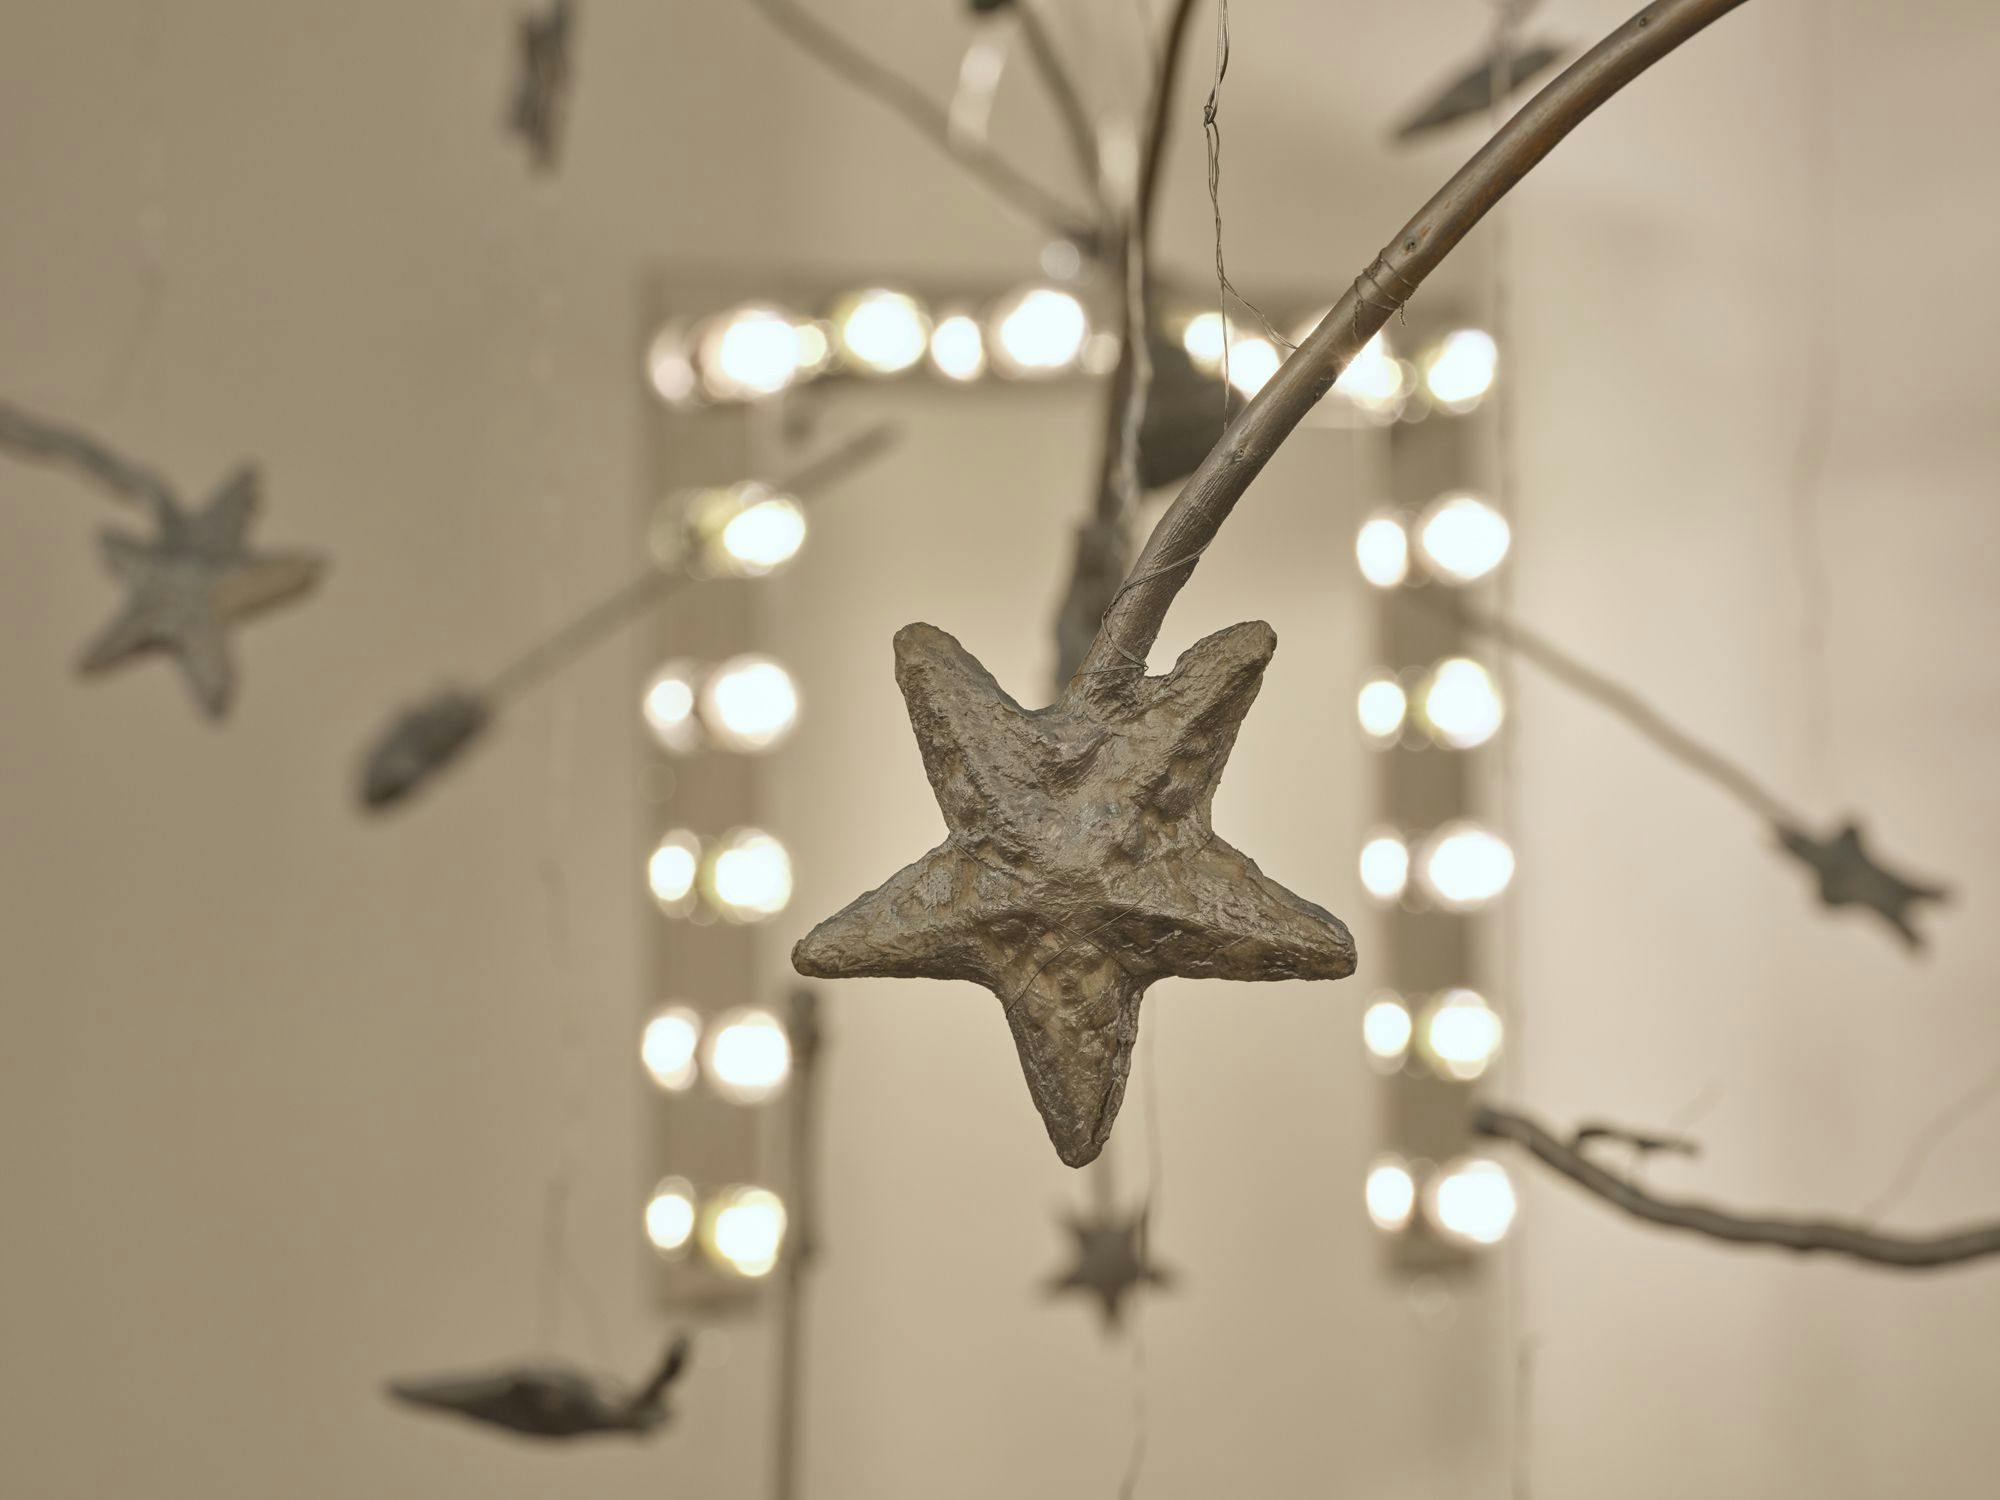 A detail view of a silver magic wand. In the background are a vanity light and more magic wands hanging from wire.